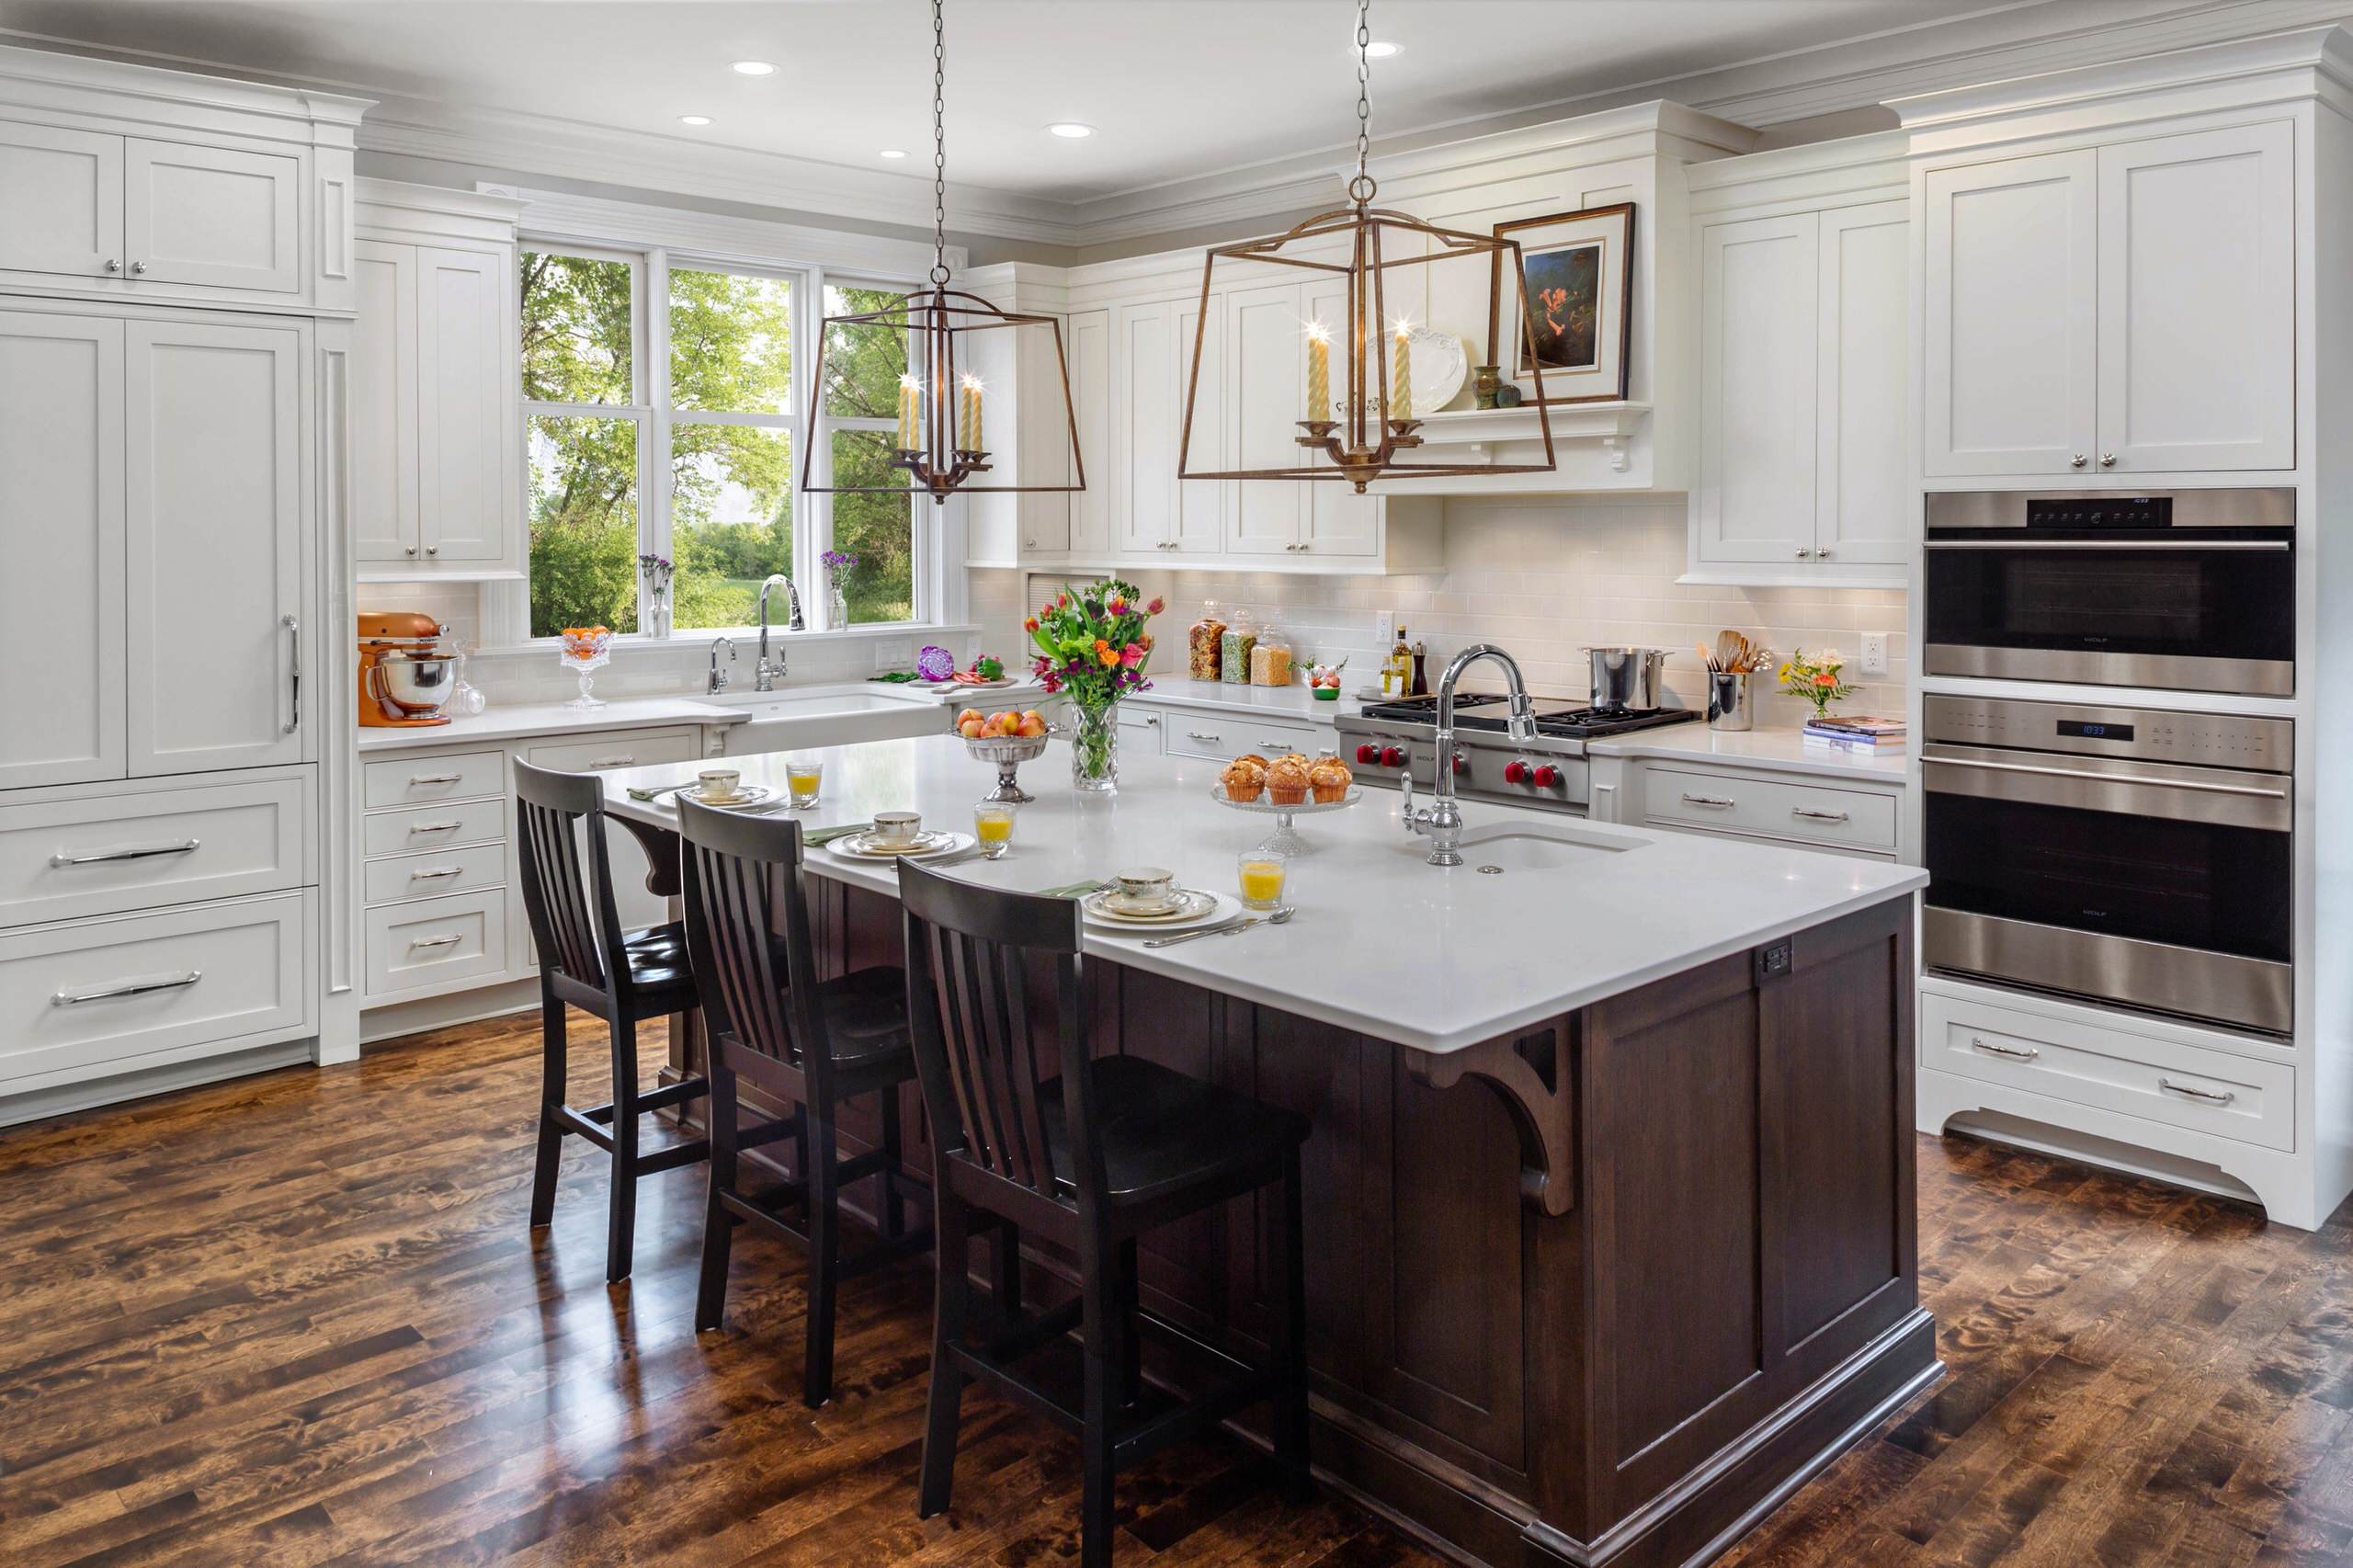 18 Kitchen with an Island Ideas You'll Love   August, 18   Houzz